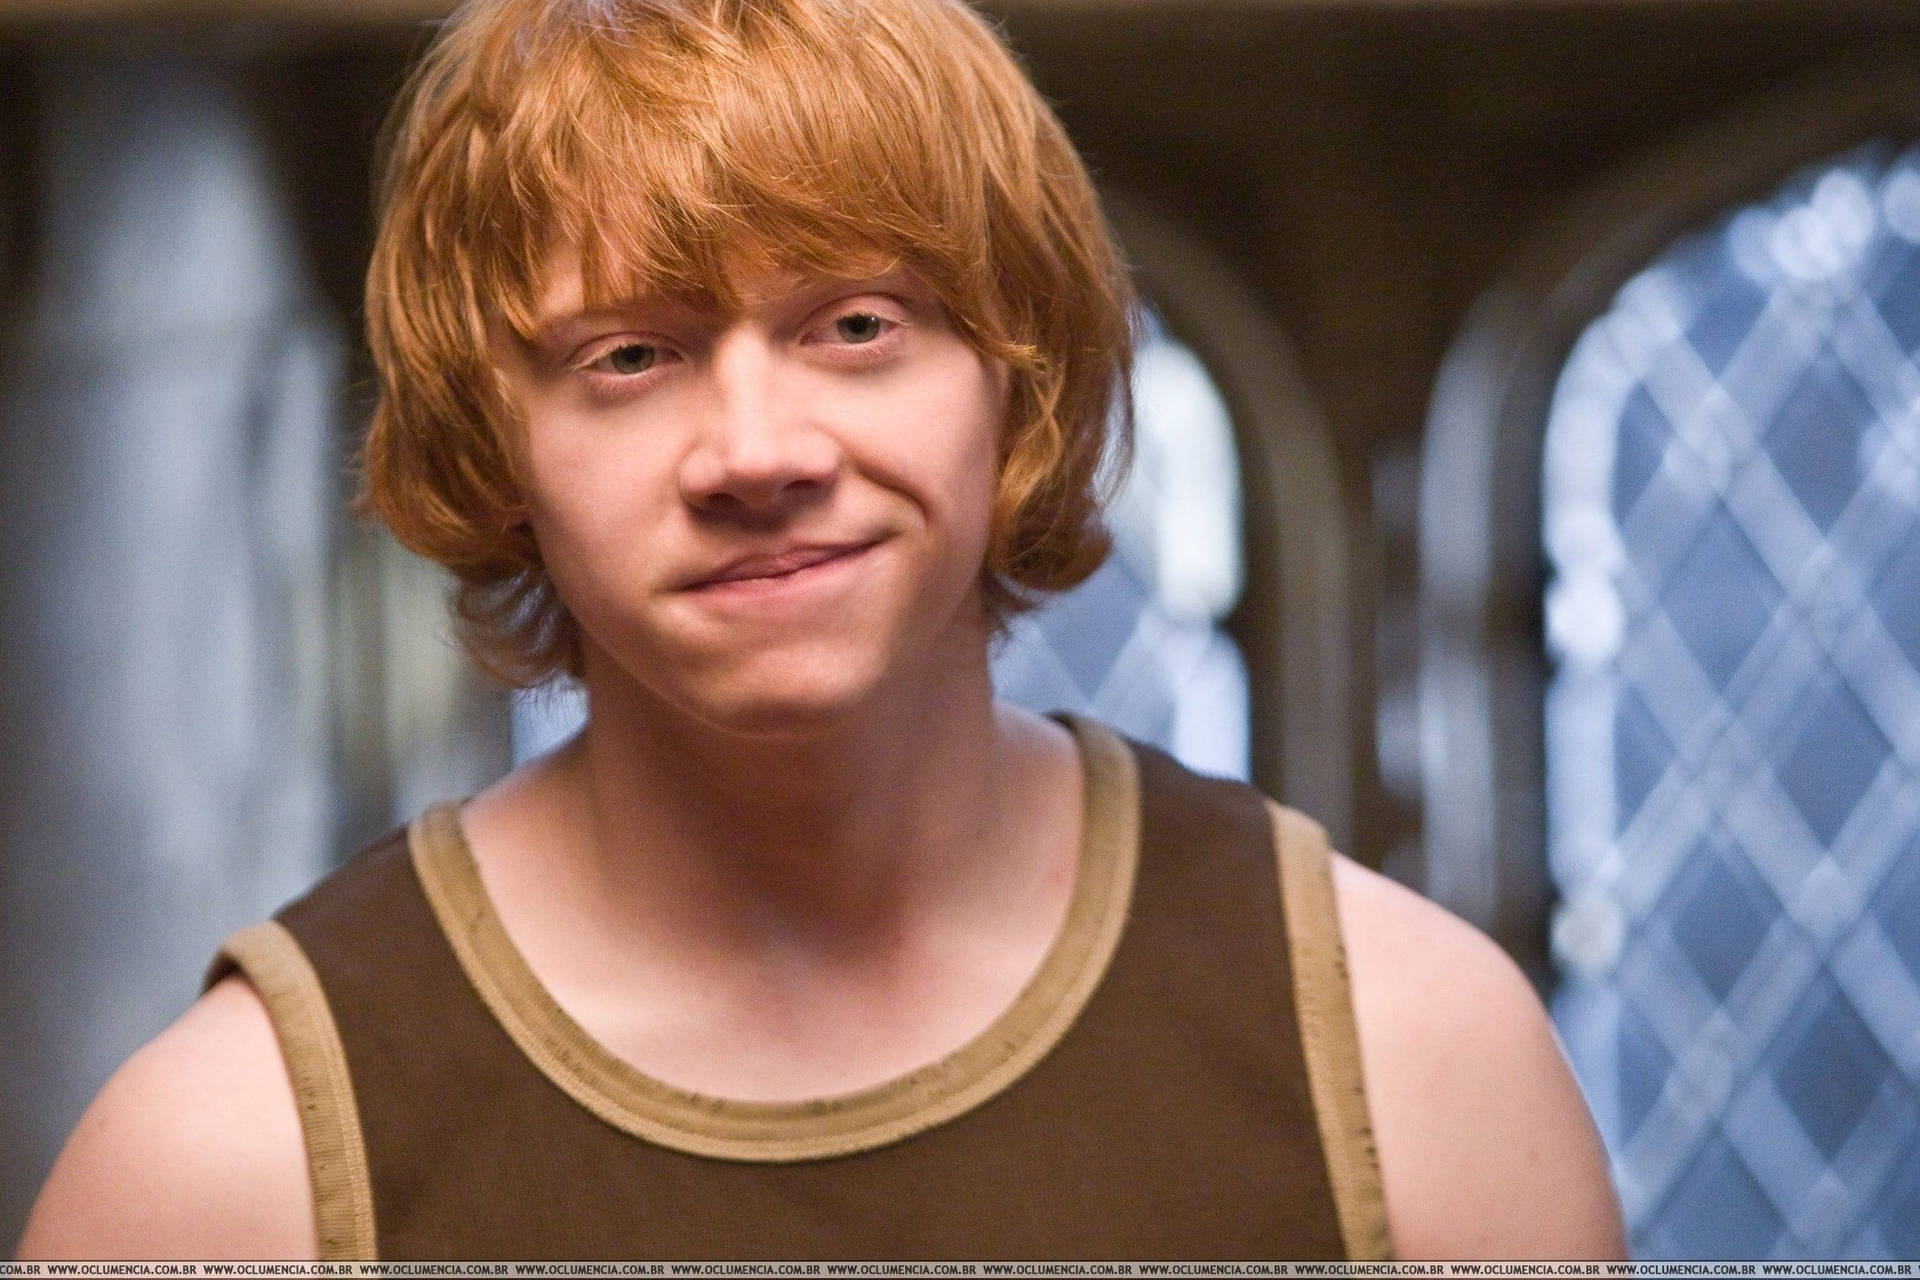 Ron Weasley Smiling